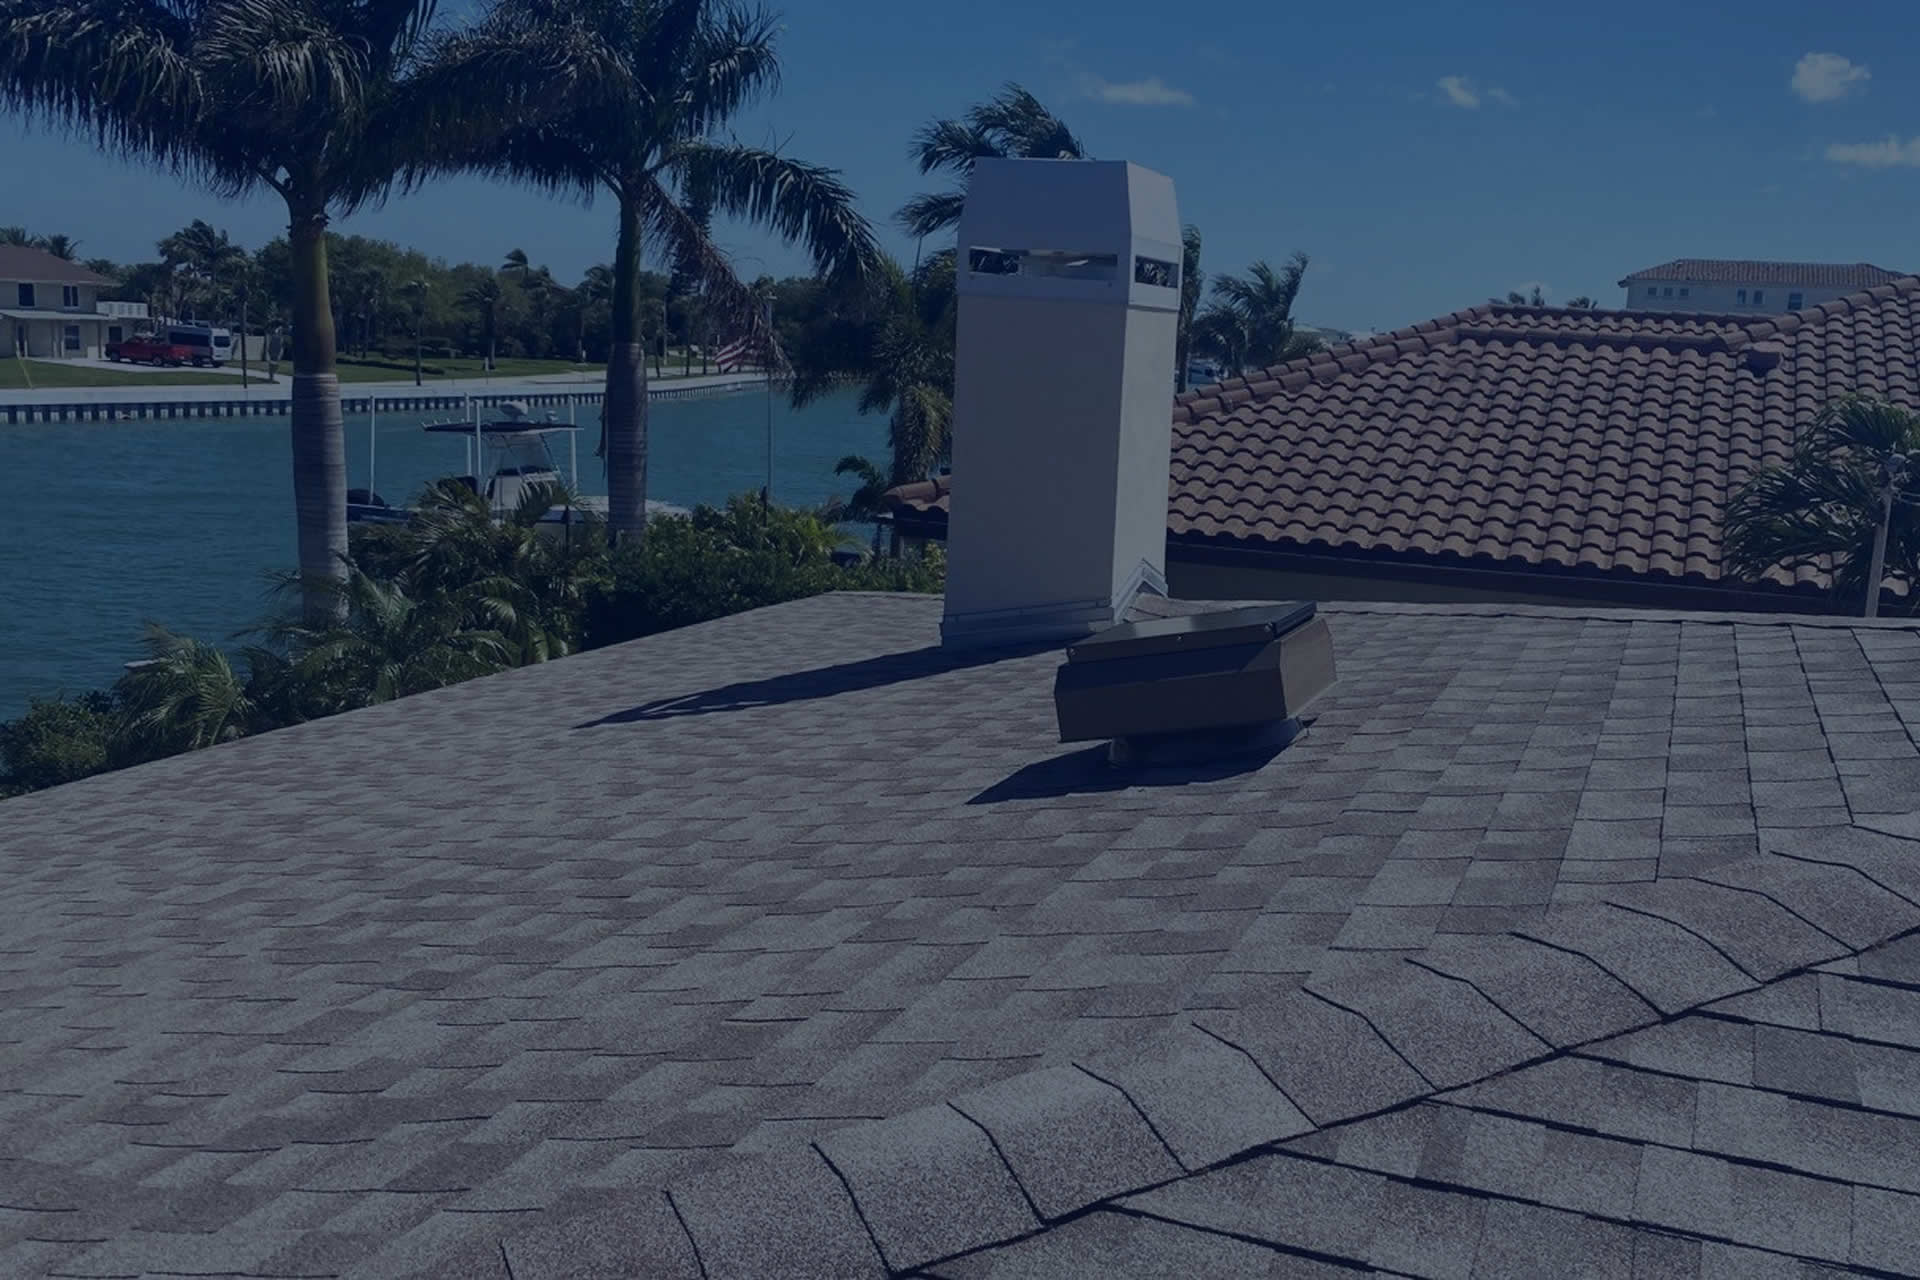 An Attic Breeze solar attic fan has the highest performance of any solar powered exhaust fan on the market.